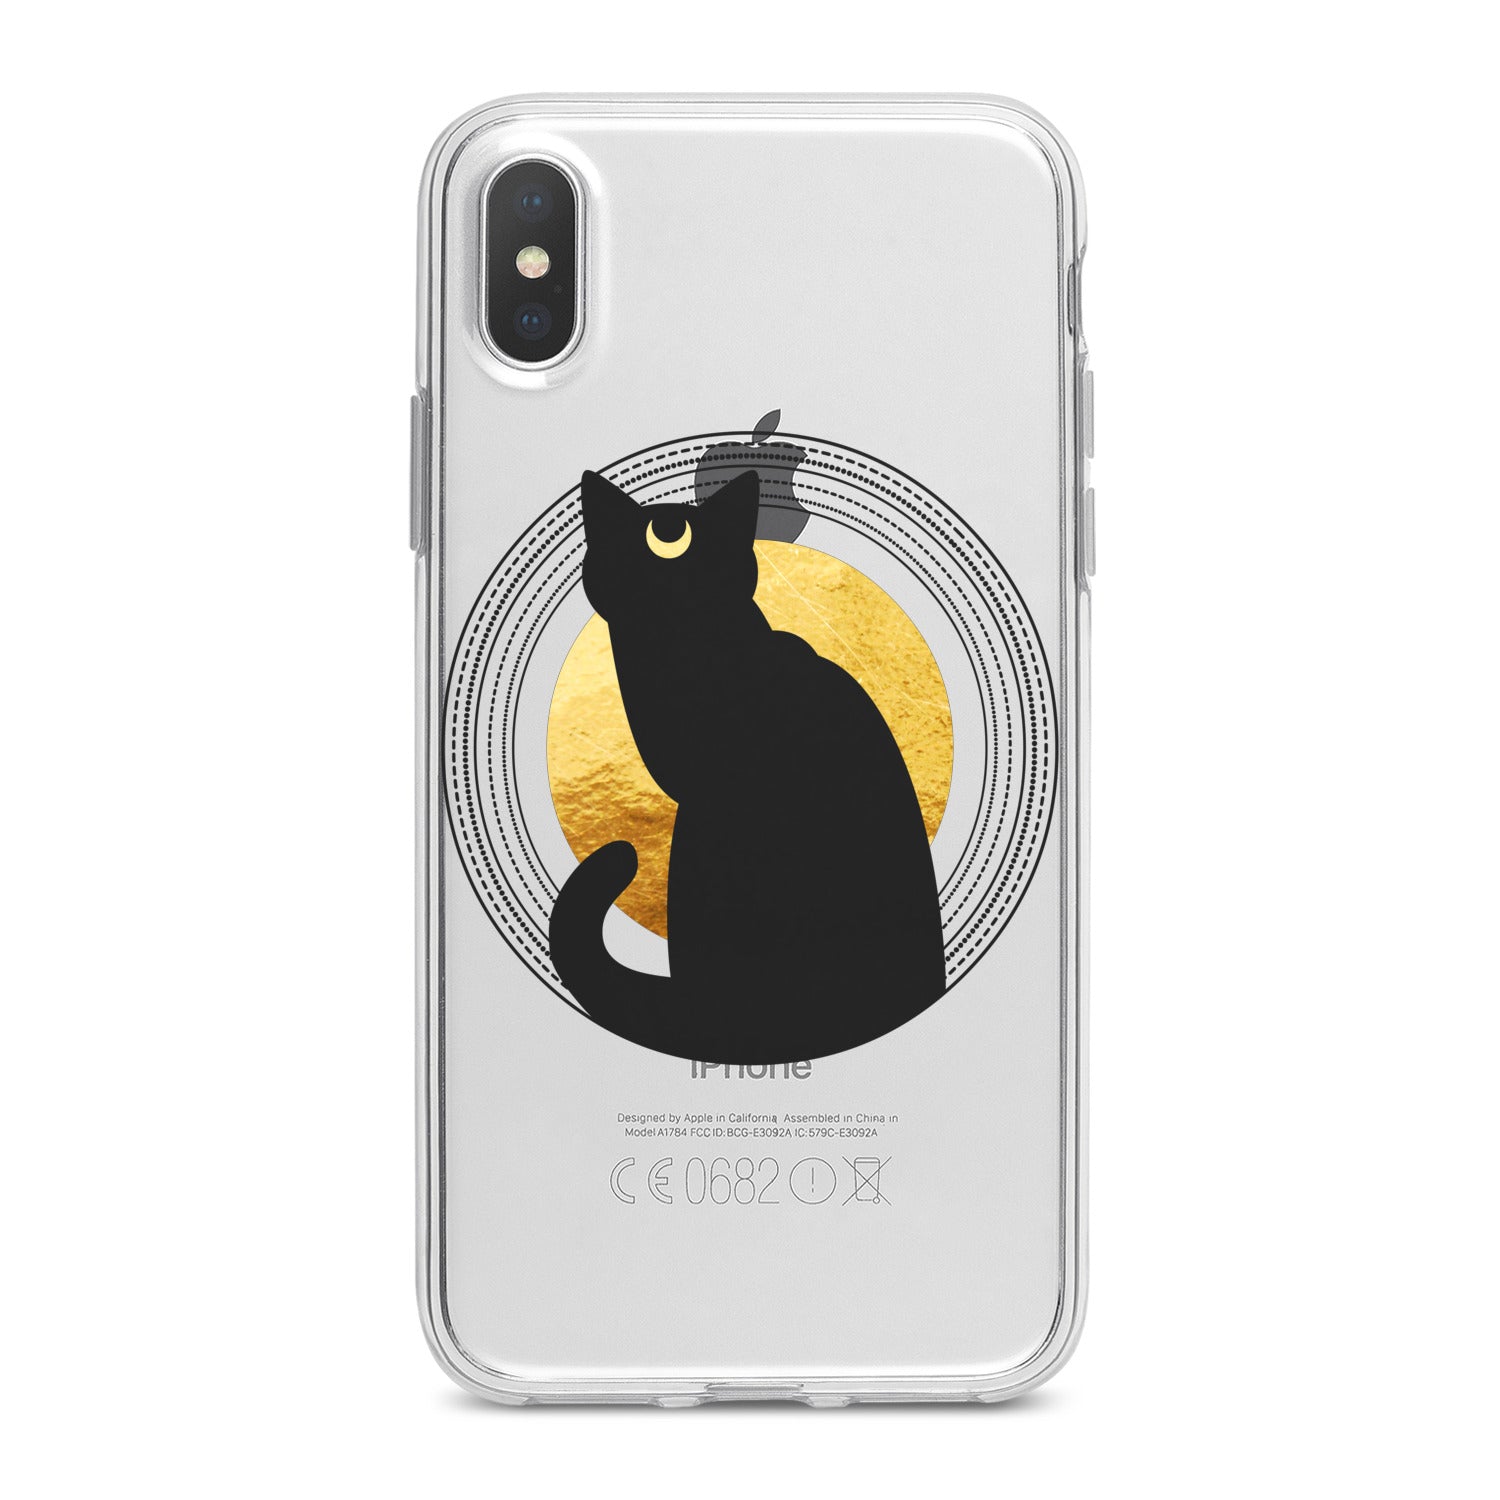 Lex Altern Bohemian Black Cat Phone Case for your iPhone & Android phone.